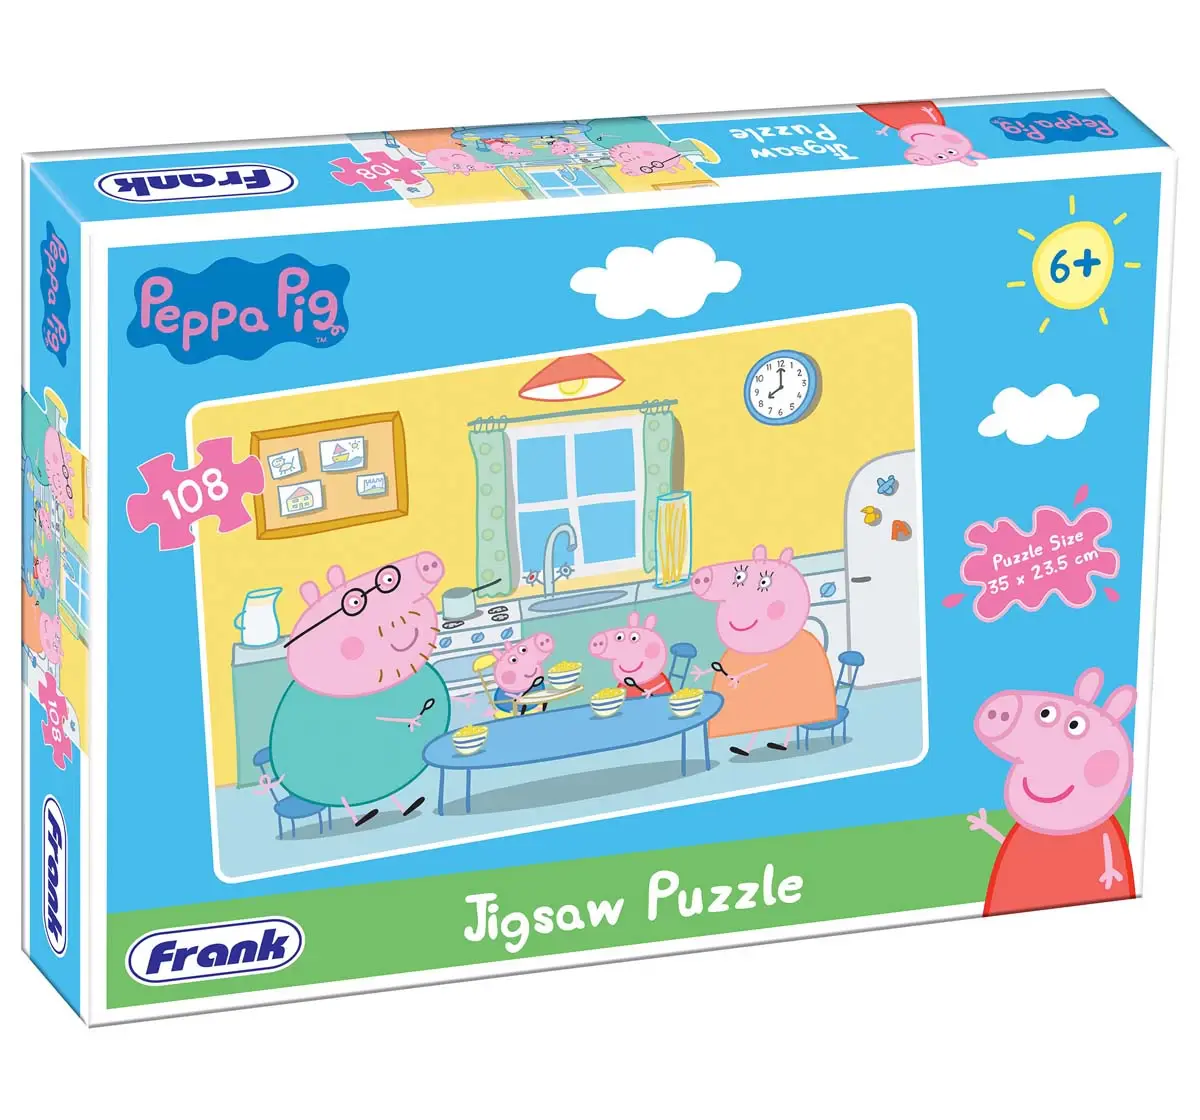 Frank Peppa Pig 108 Pcs Puzzle Puzzles for Kids Age 6Y+